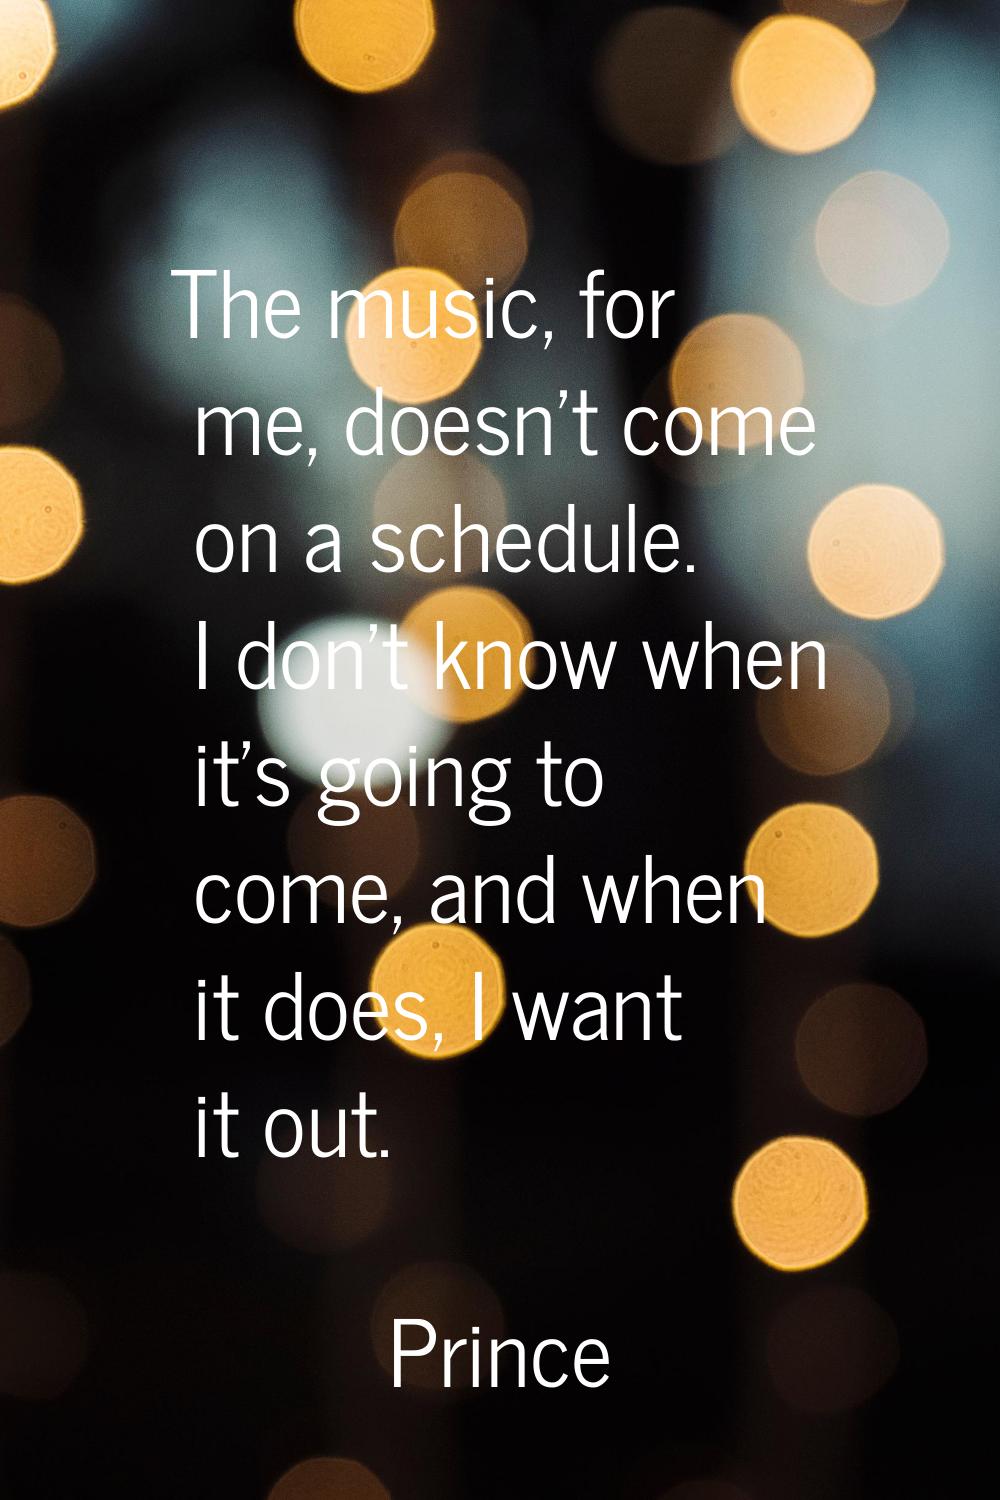 The music, for me, doesn't come on a schedule. I don't know when it's going to come, and when it do